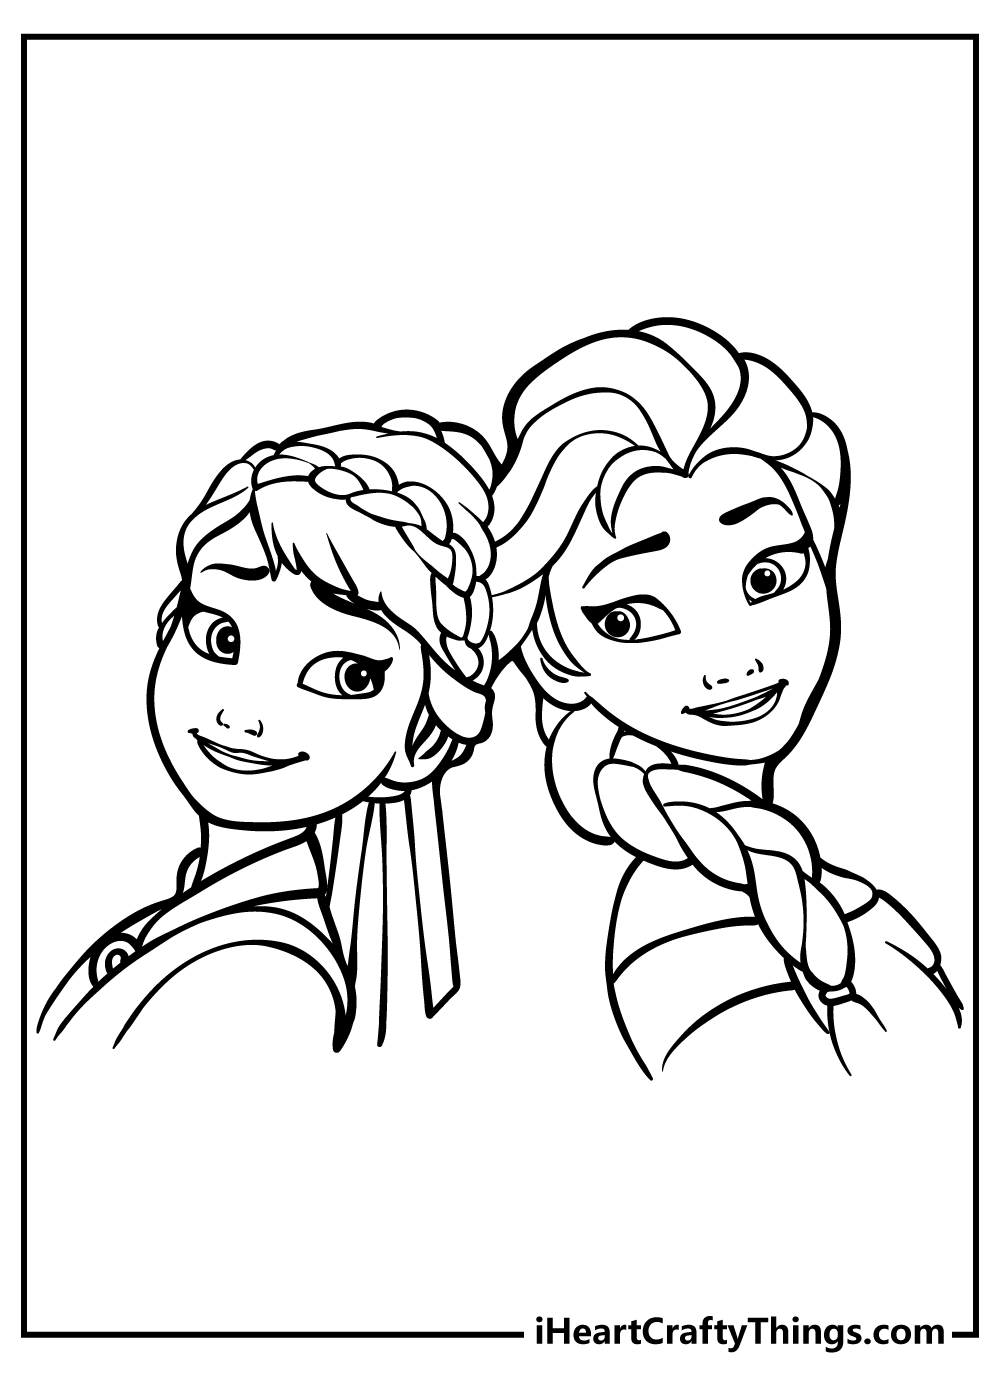 Printable Elsa And Anna Coloring Pages Updated 21